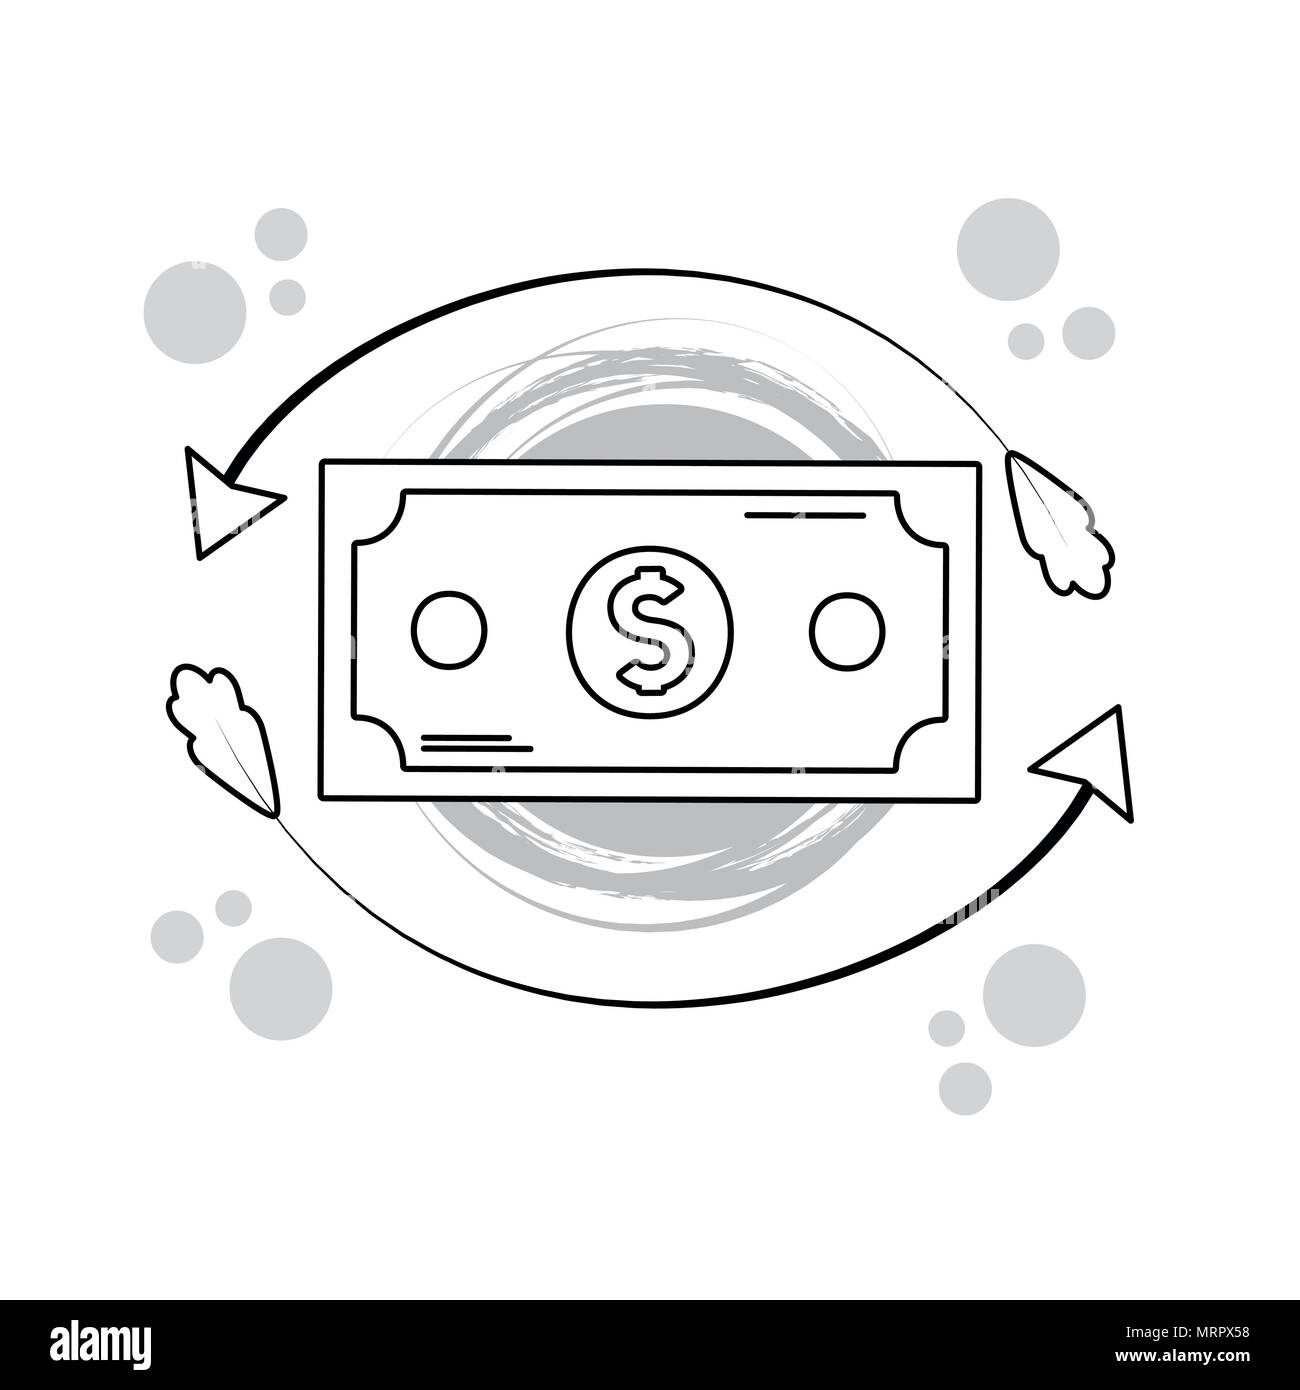 Drawing Money Cut Out Stock Images Pictures Alamy - hand draw money and business cartoons stock image